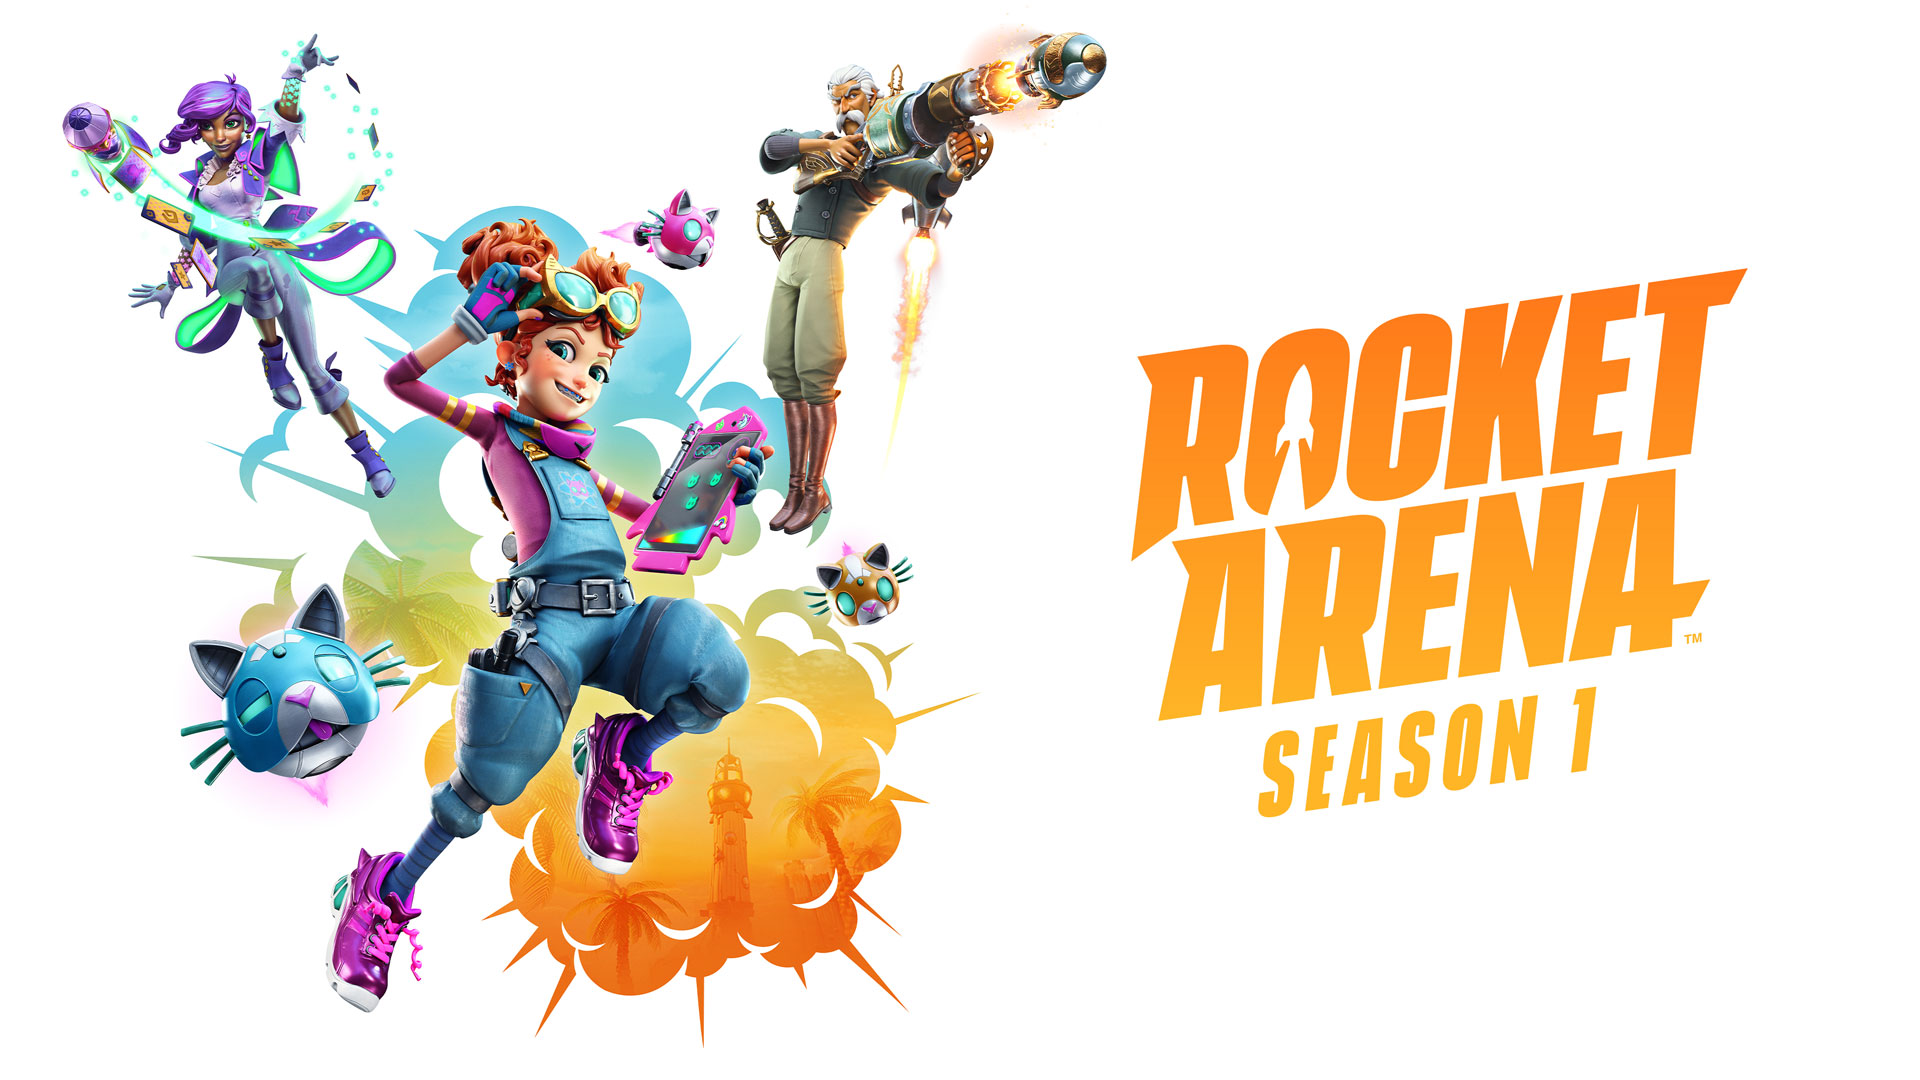 when does rocket arena come out